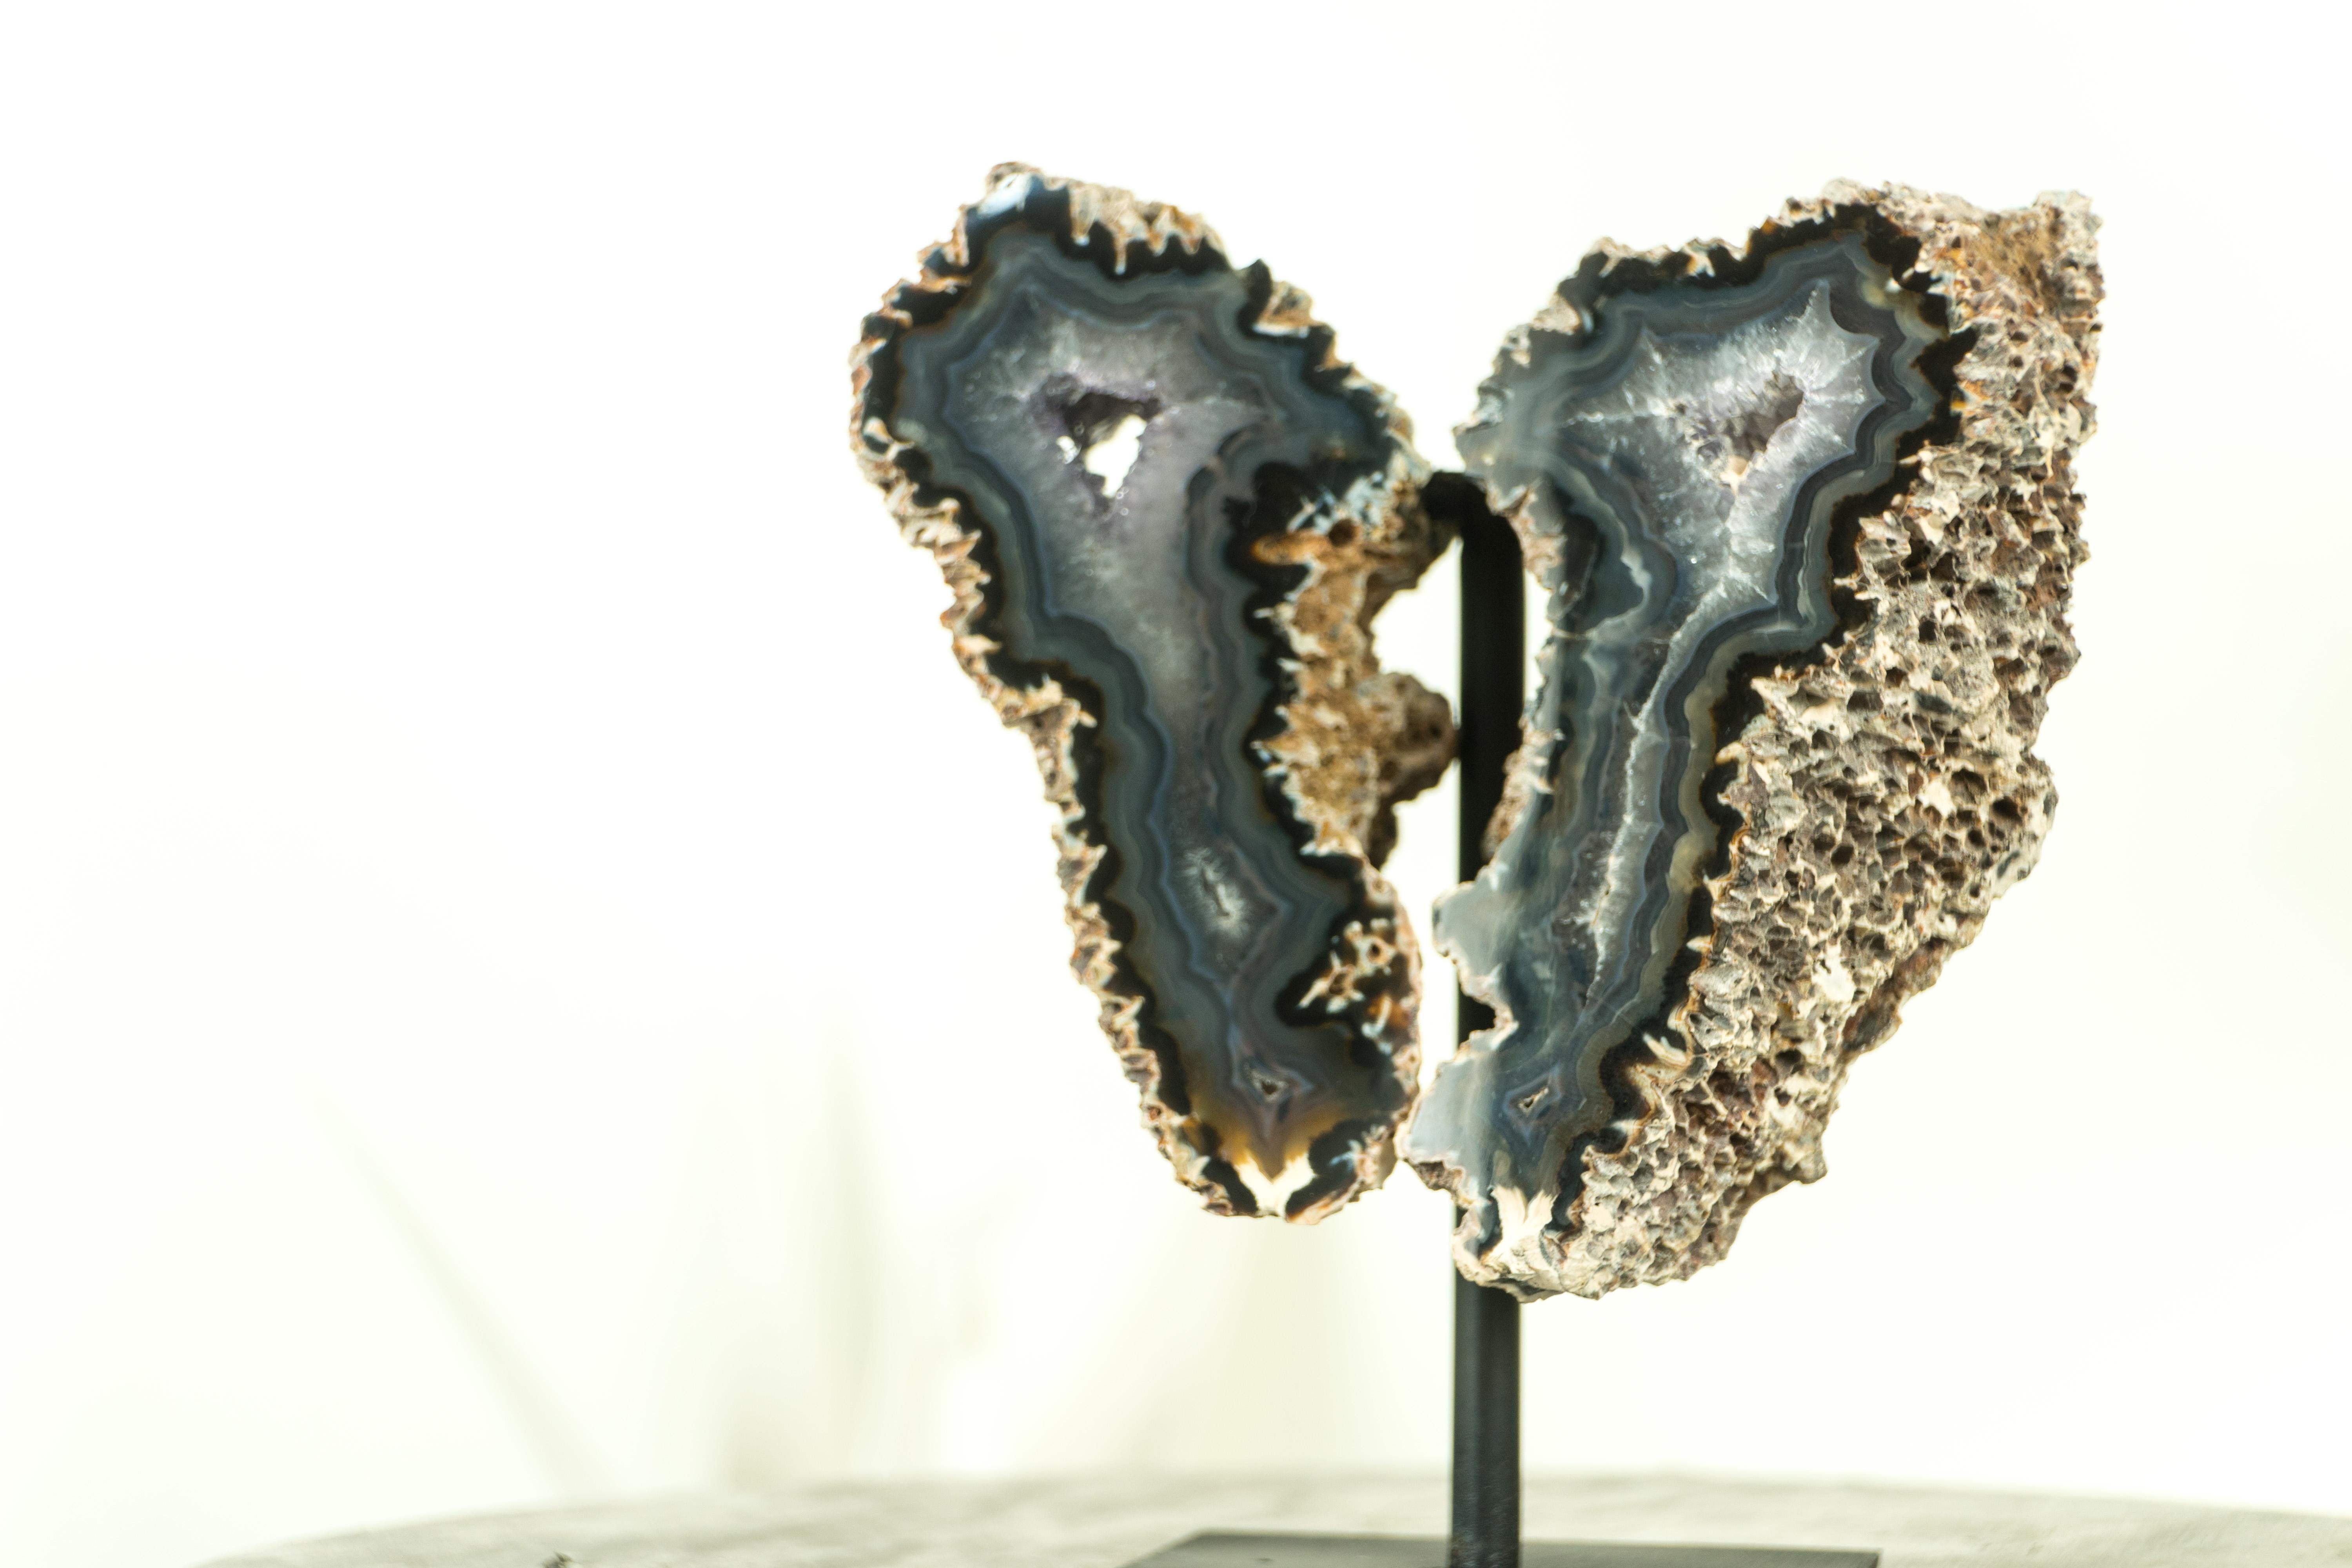 Small Spiky Lace Agate Geode with Druzy, in Butterfly Wings Format, Intact For Sale 9